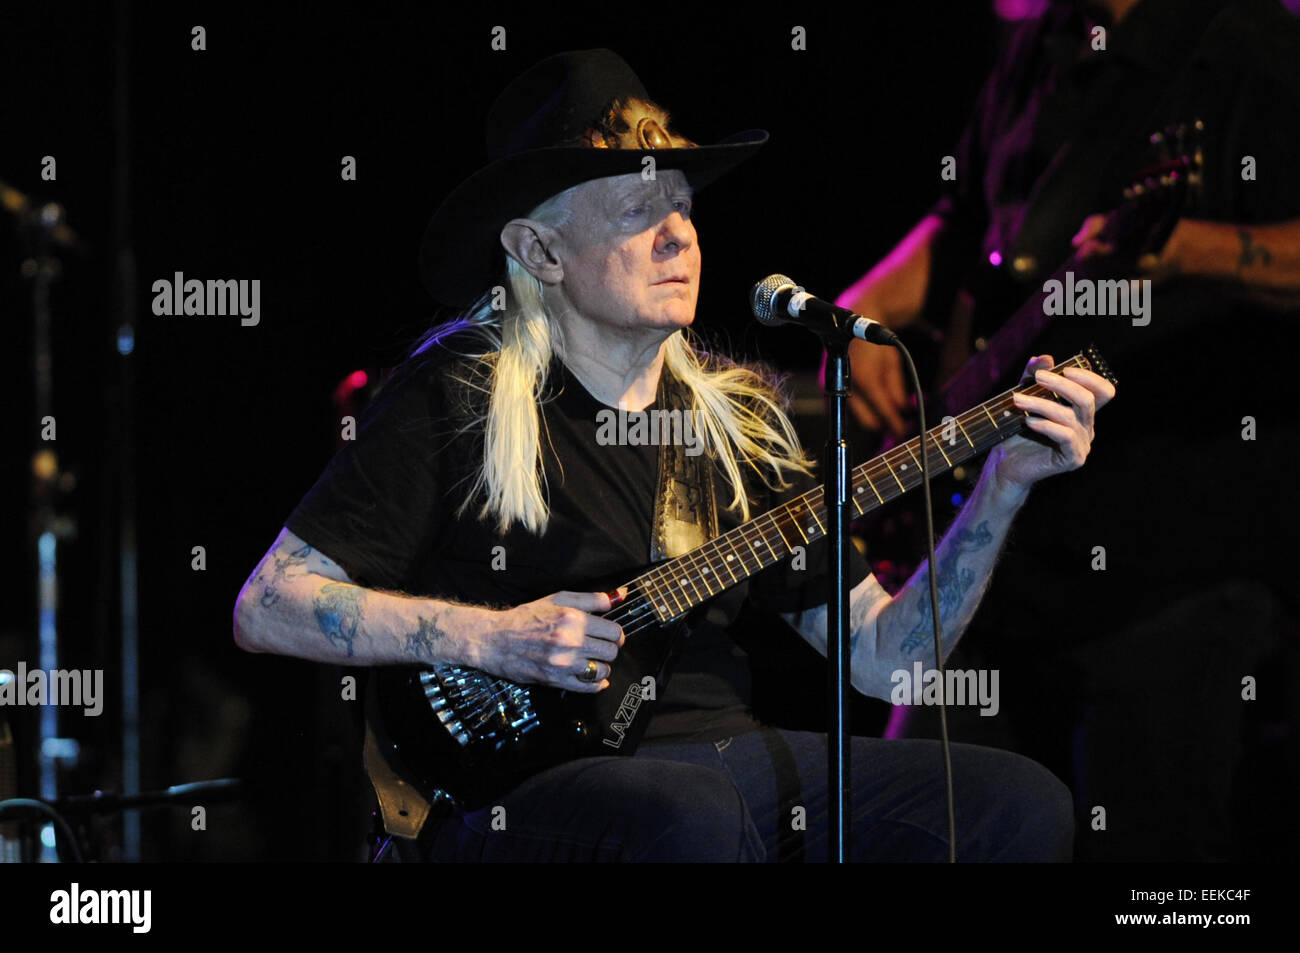 COCONUT CREEK, FL - JULY 17: Texas blues legend Johnny Winter, known for his lightning-fast blues guitar riffs, his striking long white hair and his collaborations with the likes of Jimi Hendrix and childhood hero Muddy Waters, has died in a hotel room in Stock Photo